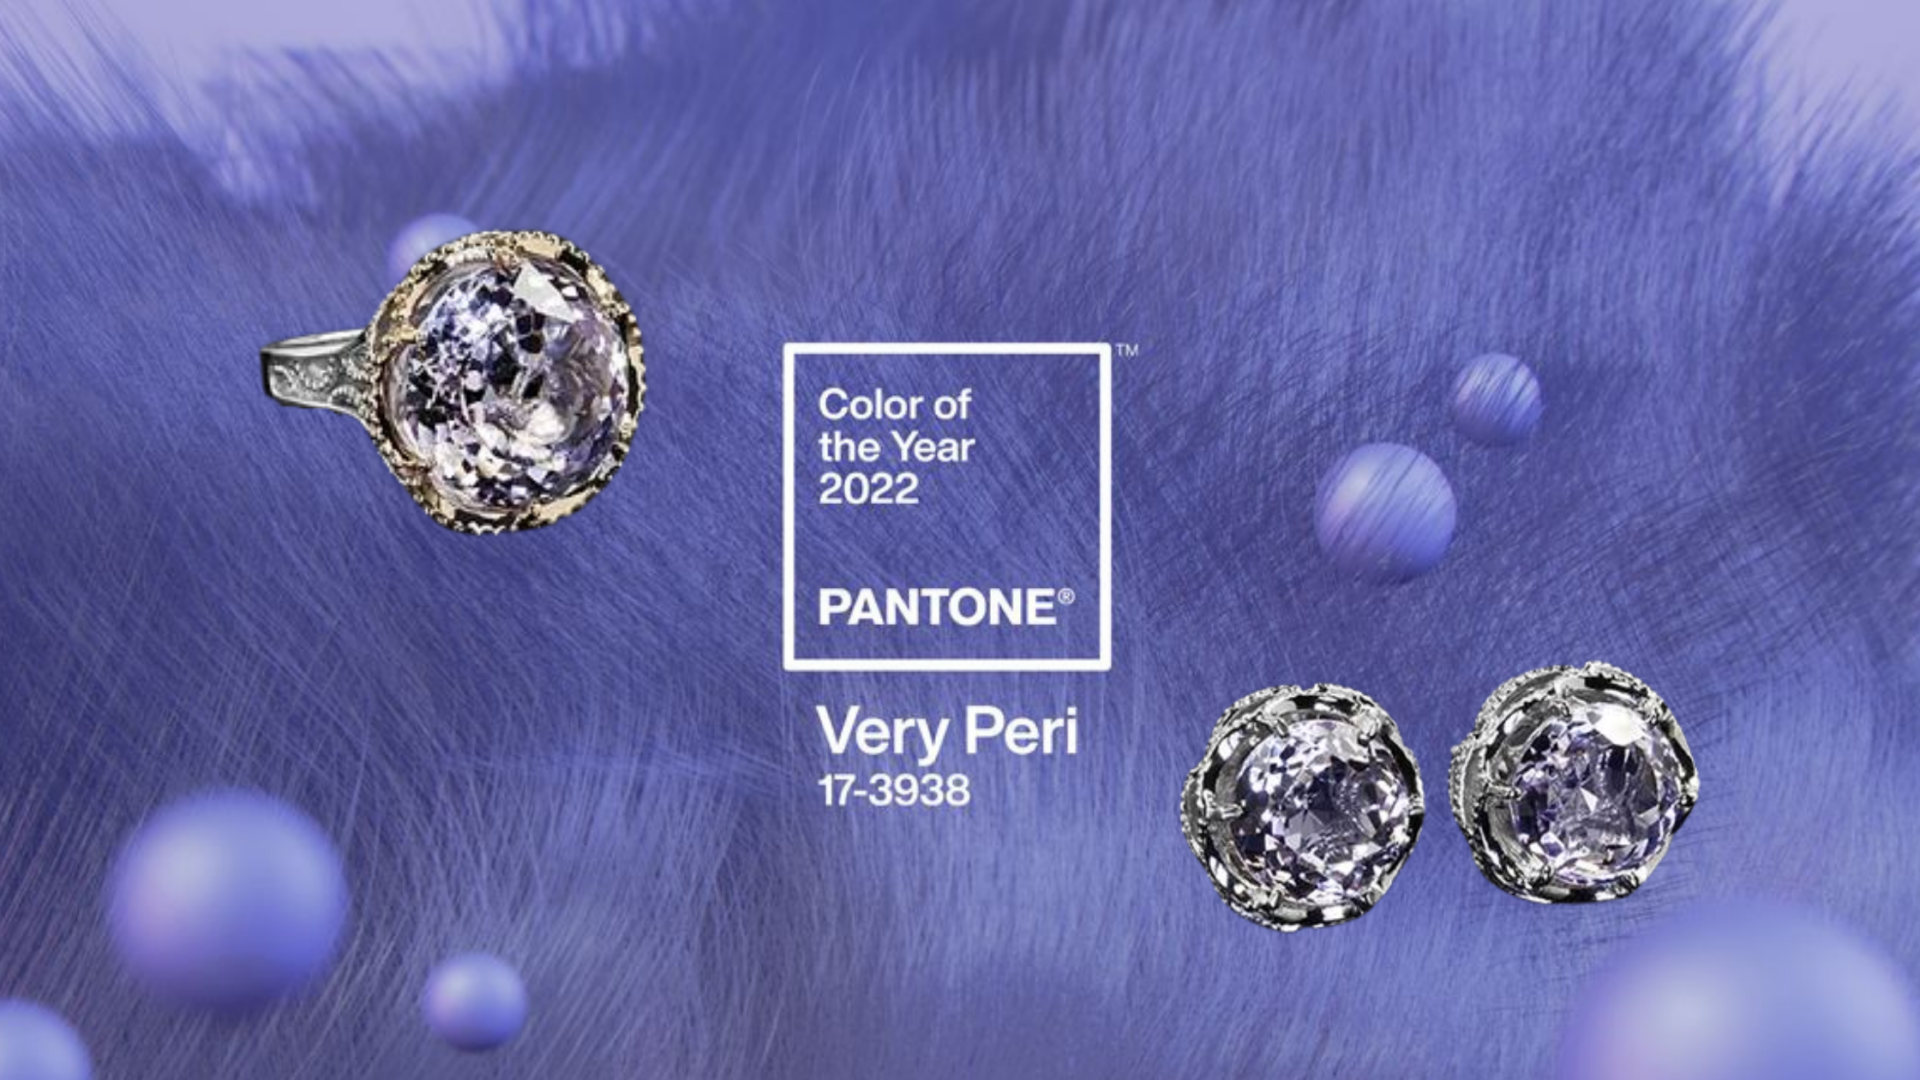 Wearing Pantone's Very Peri, the 2022 Color of the Year!